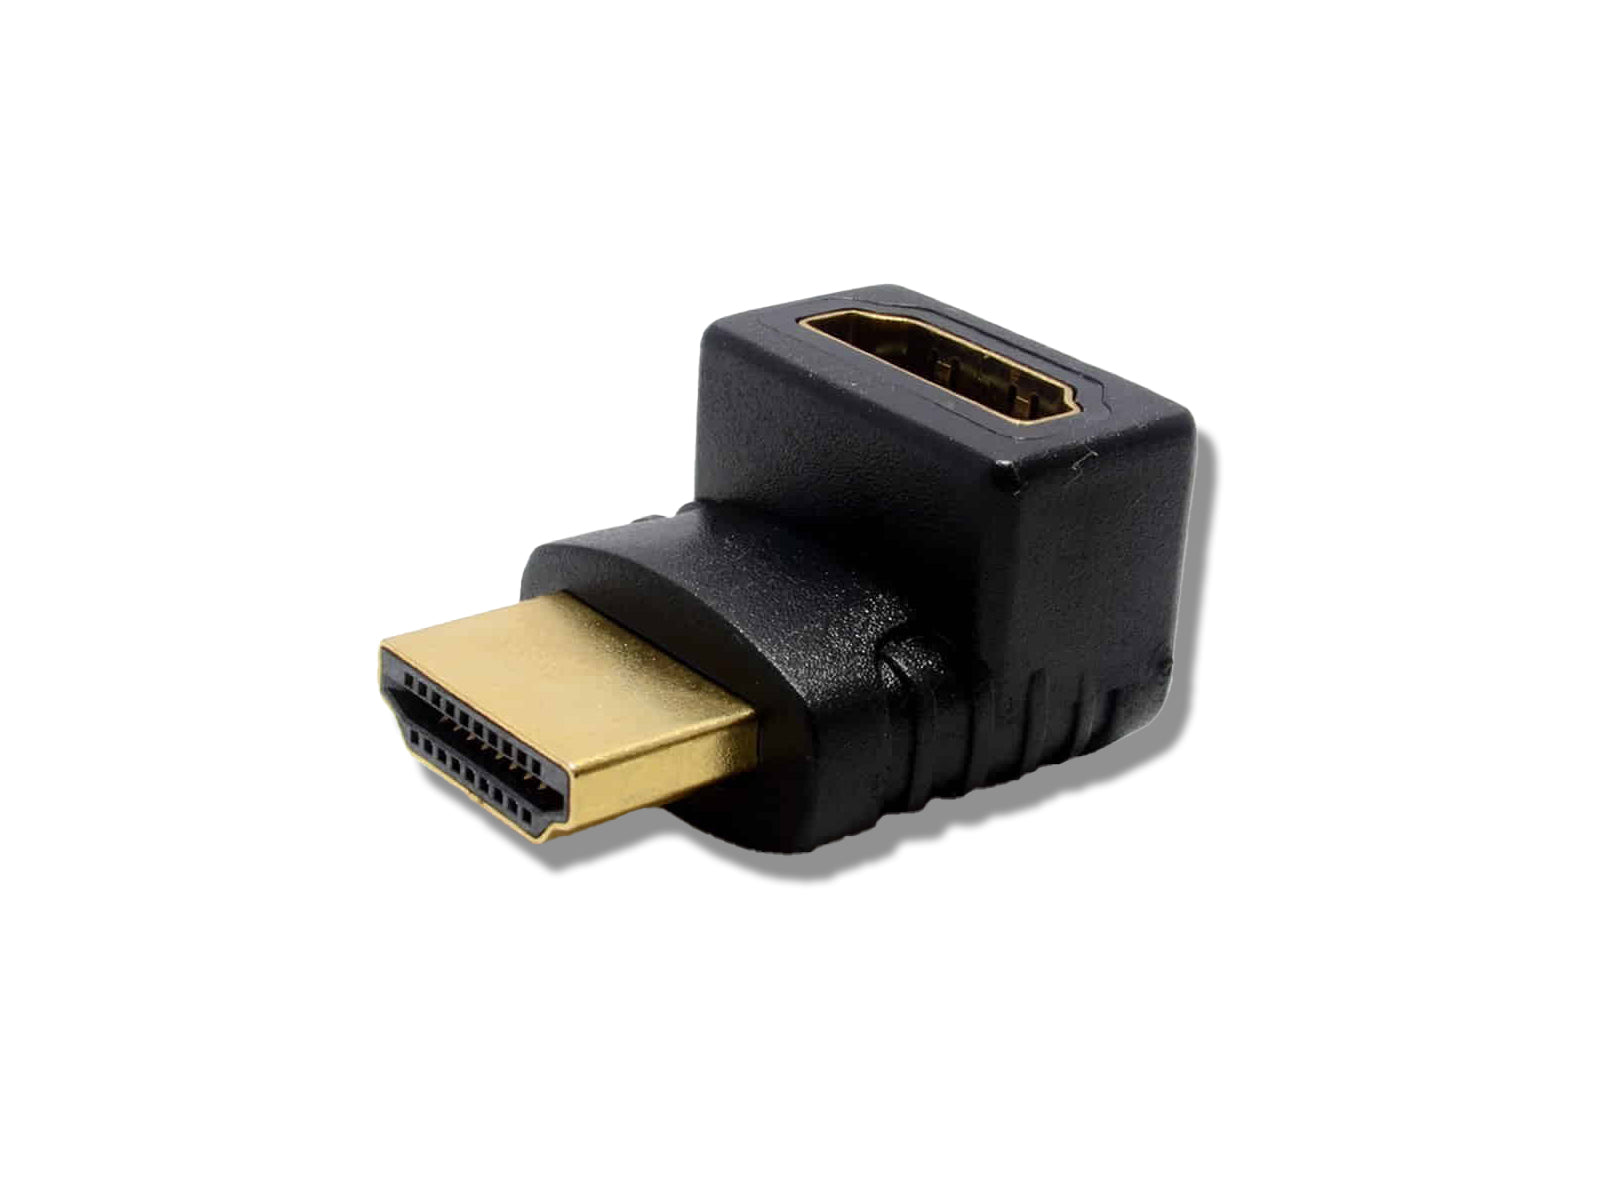 4K HDMI Adapter Side View